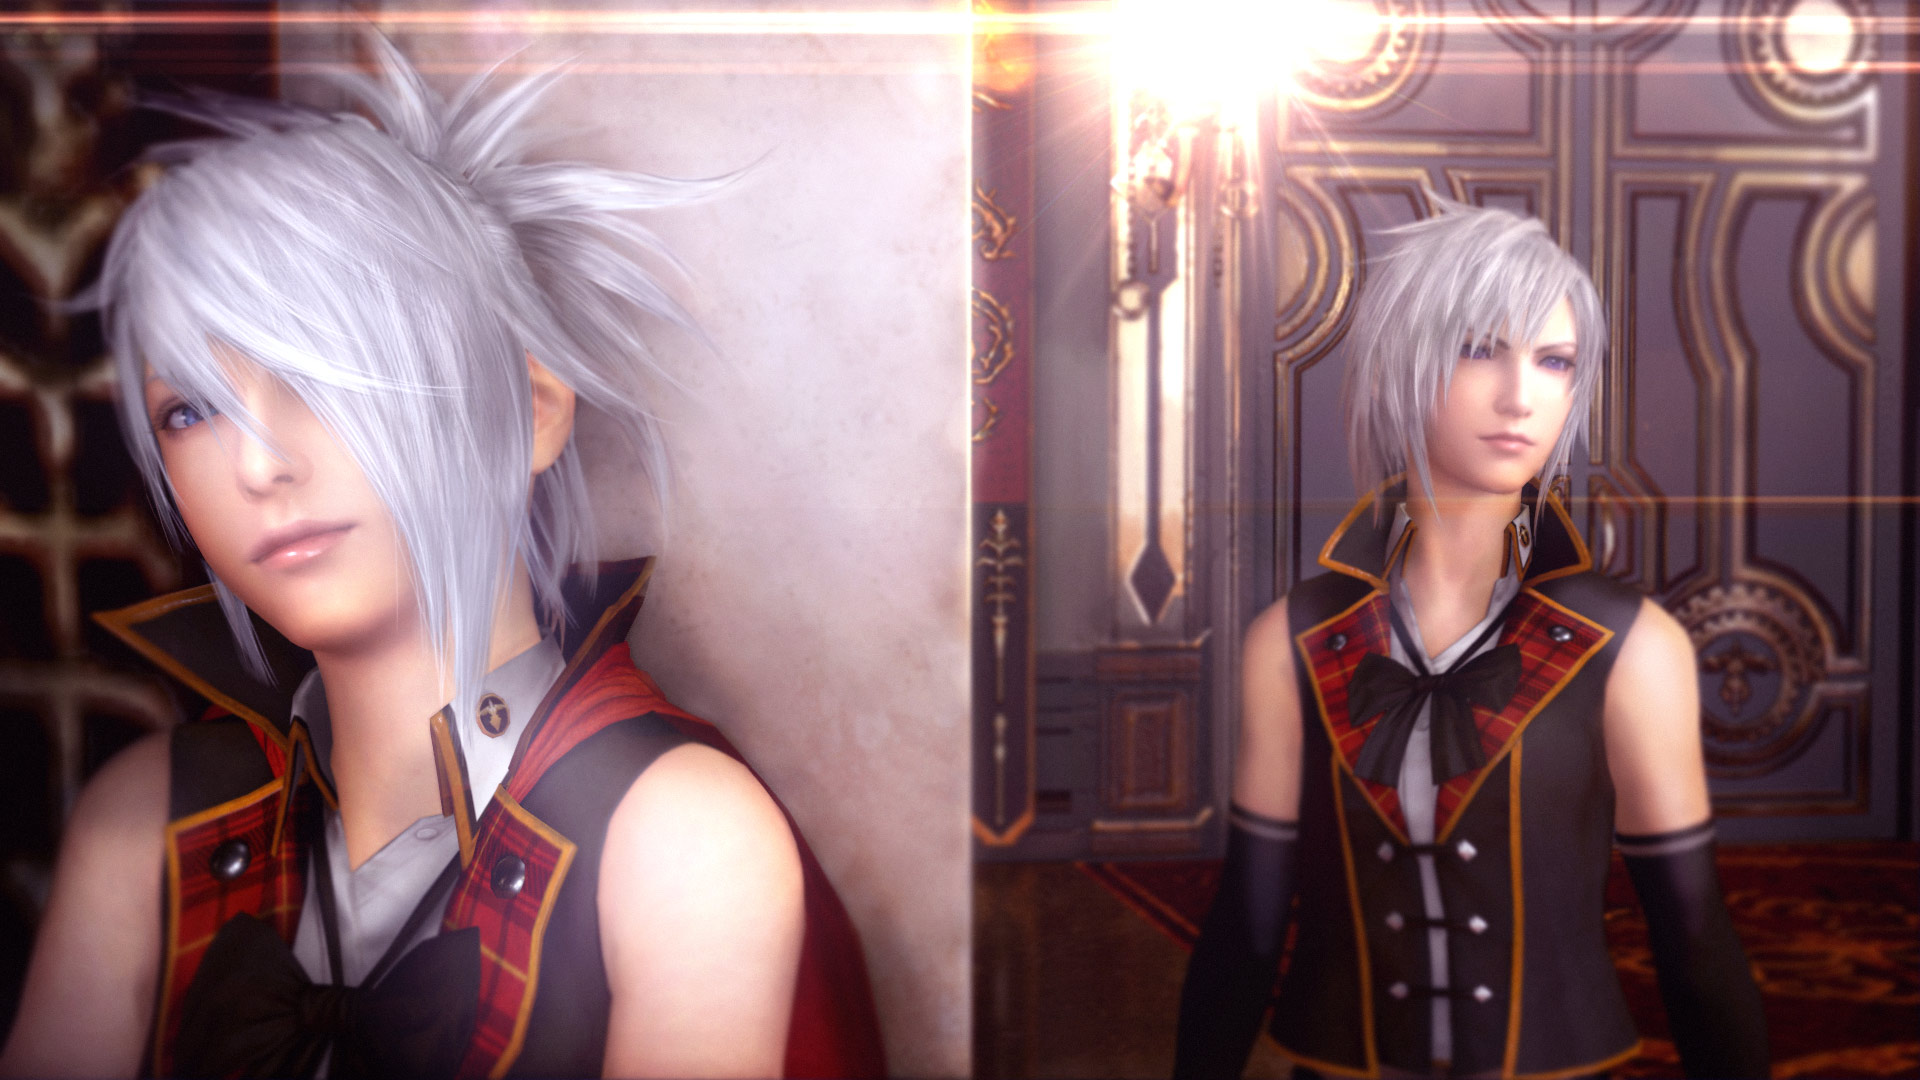 ff type 0 hd download